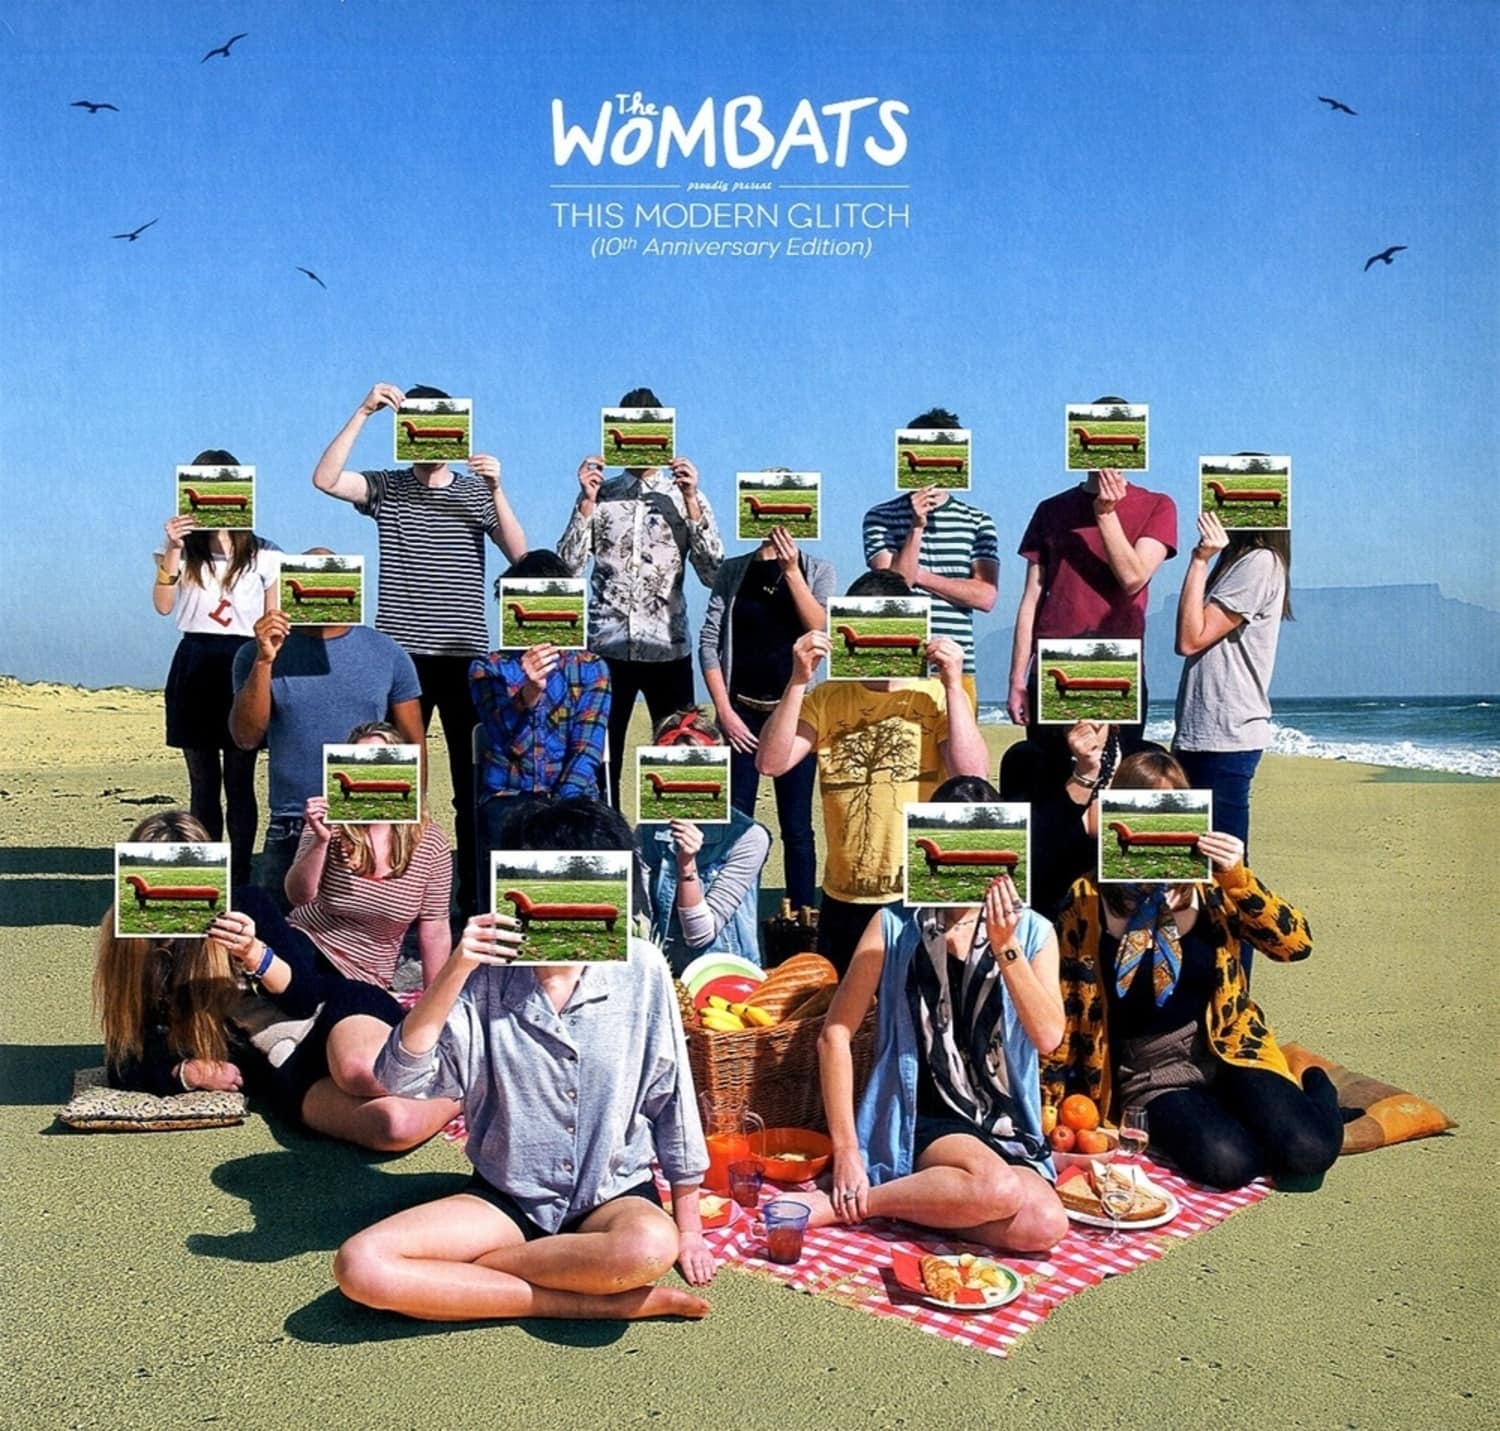 The Wombats - THE WOMBATS PROUDLY PRESENT...THIS MODERN GLITCH 